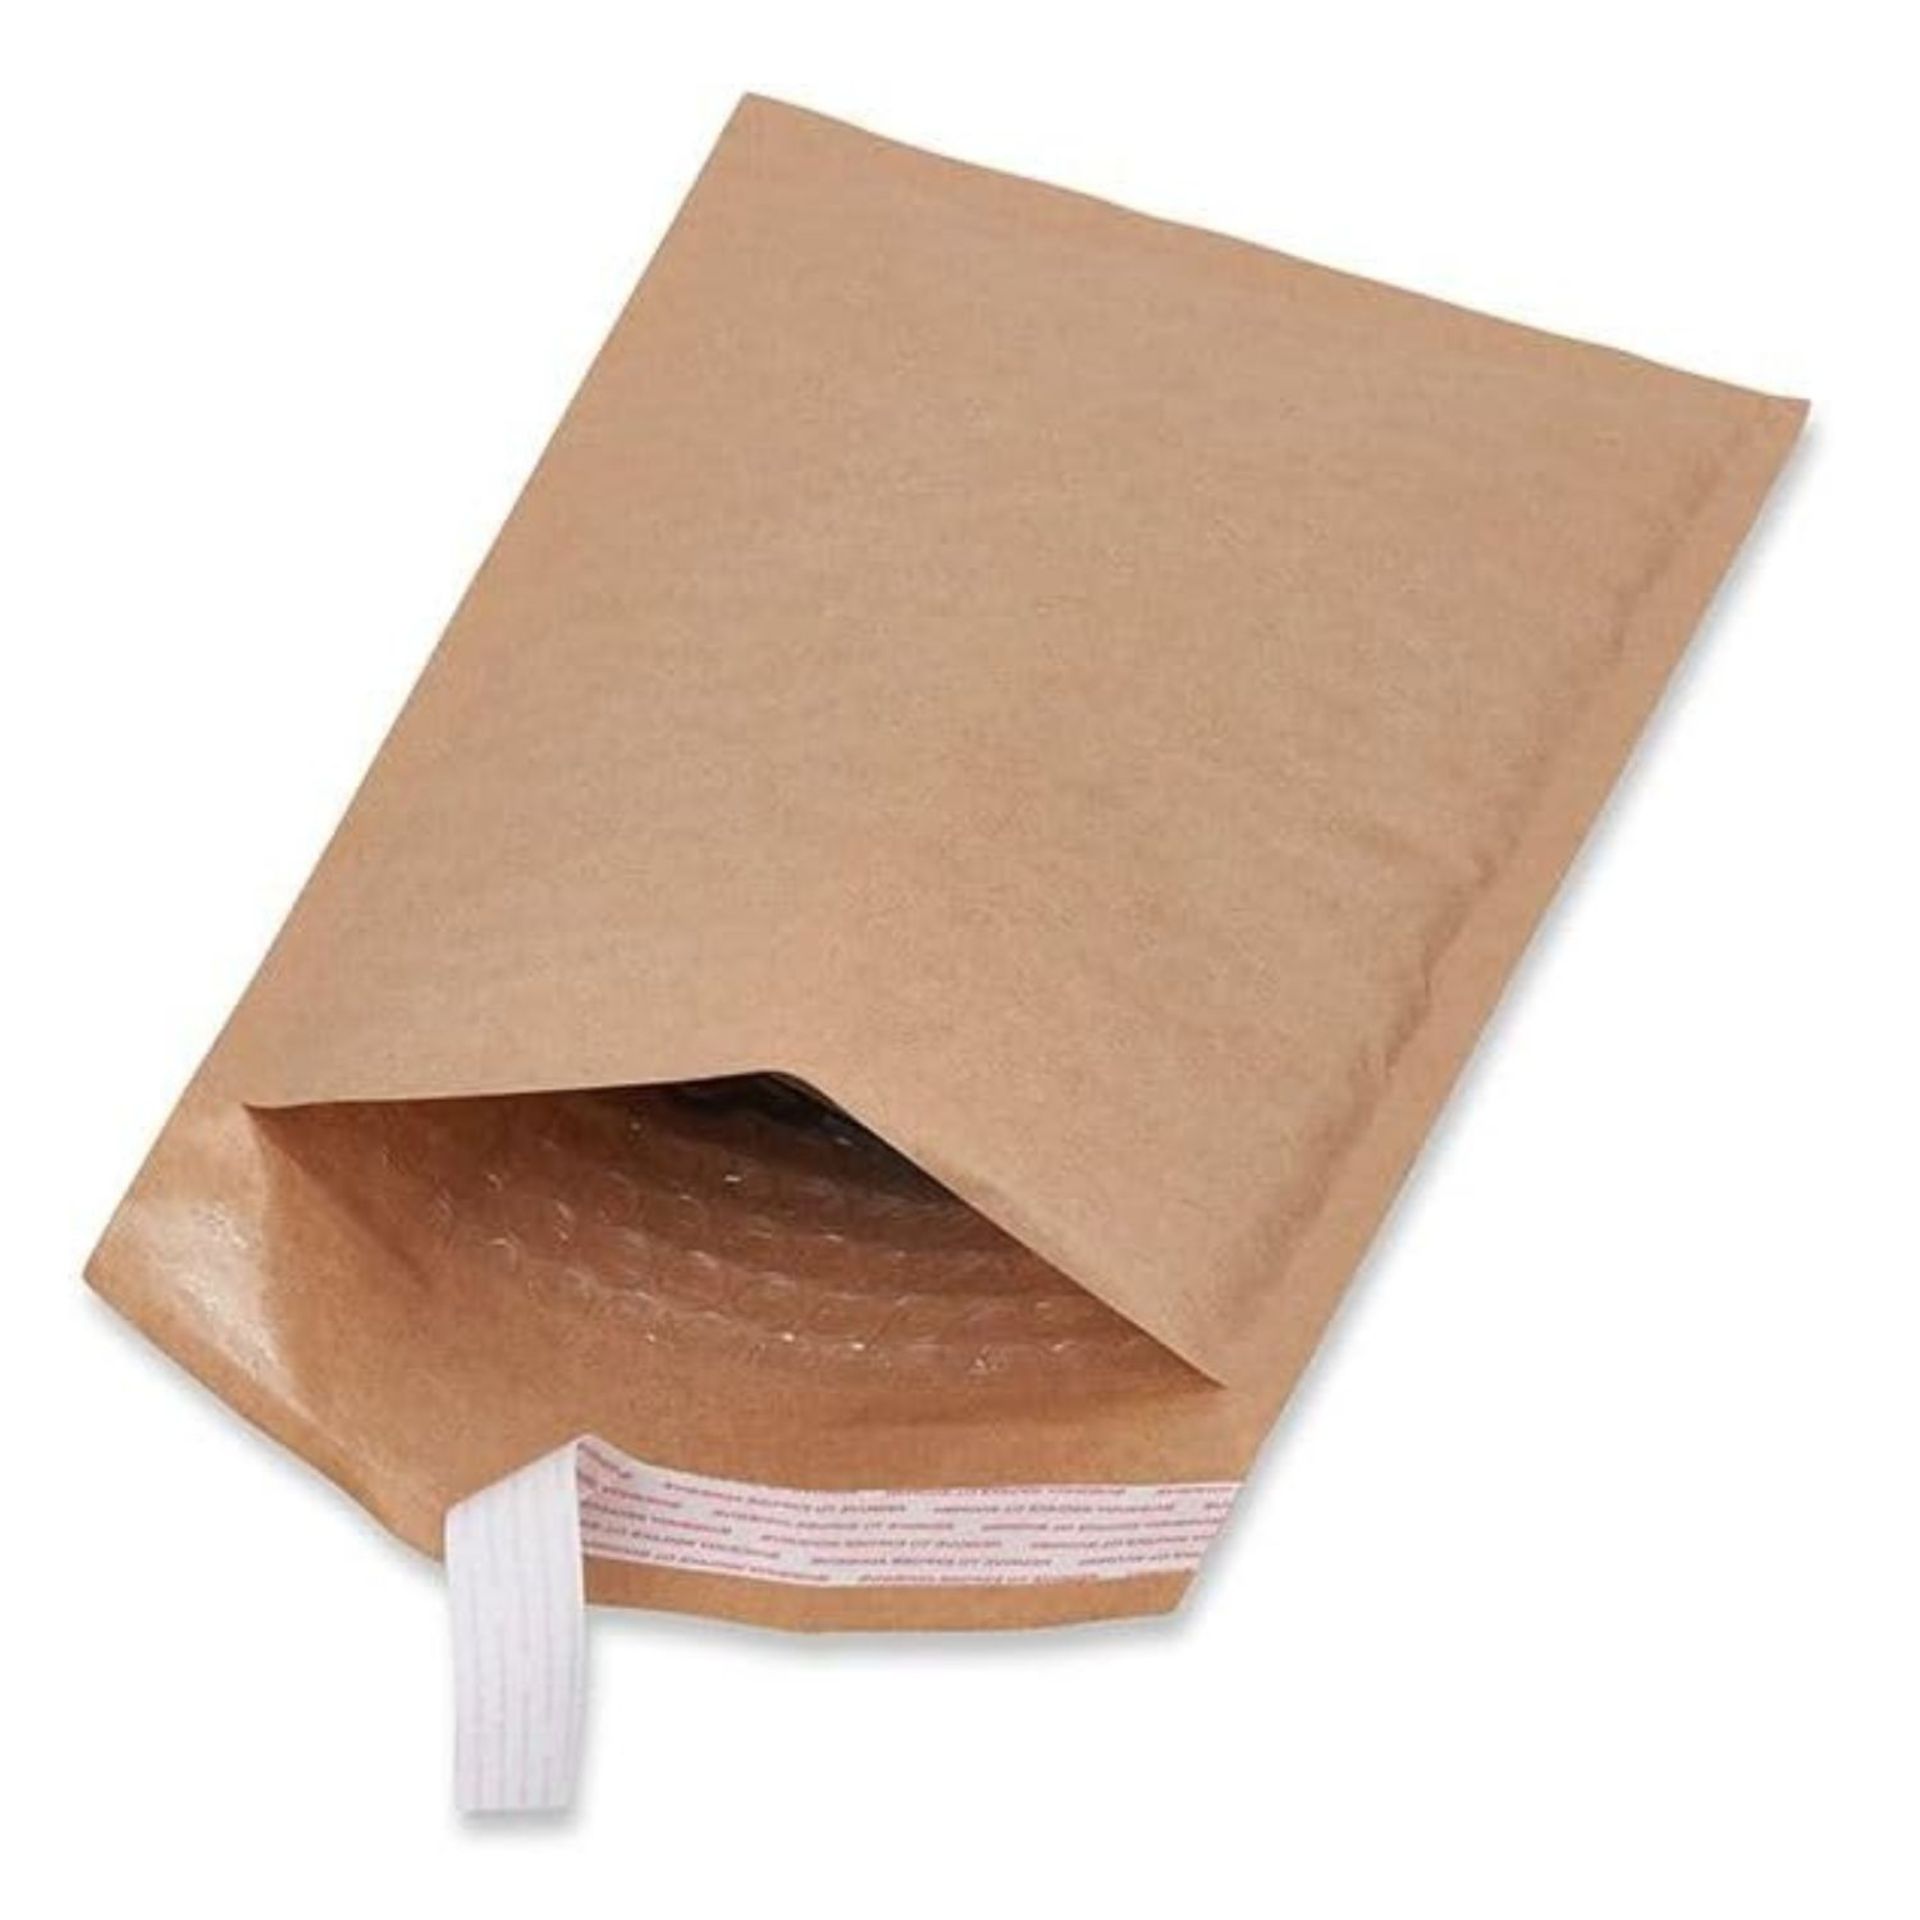 1000 BUBBLE ENVELOPES WITH PEEL AND SEAL TOUGH LIGHT PADDED (170 X 210MM) - Image 2 of 4